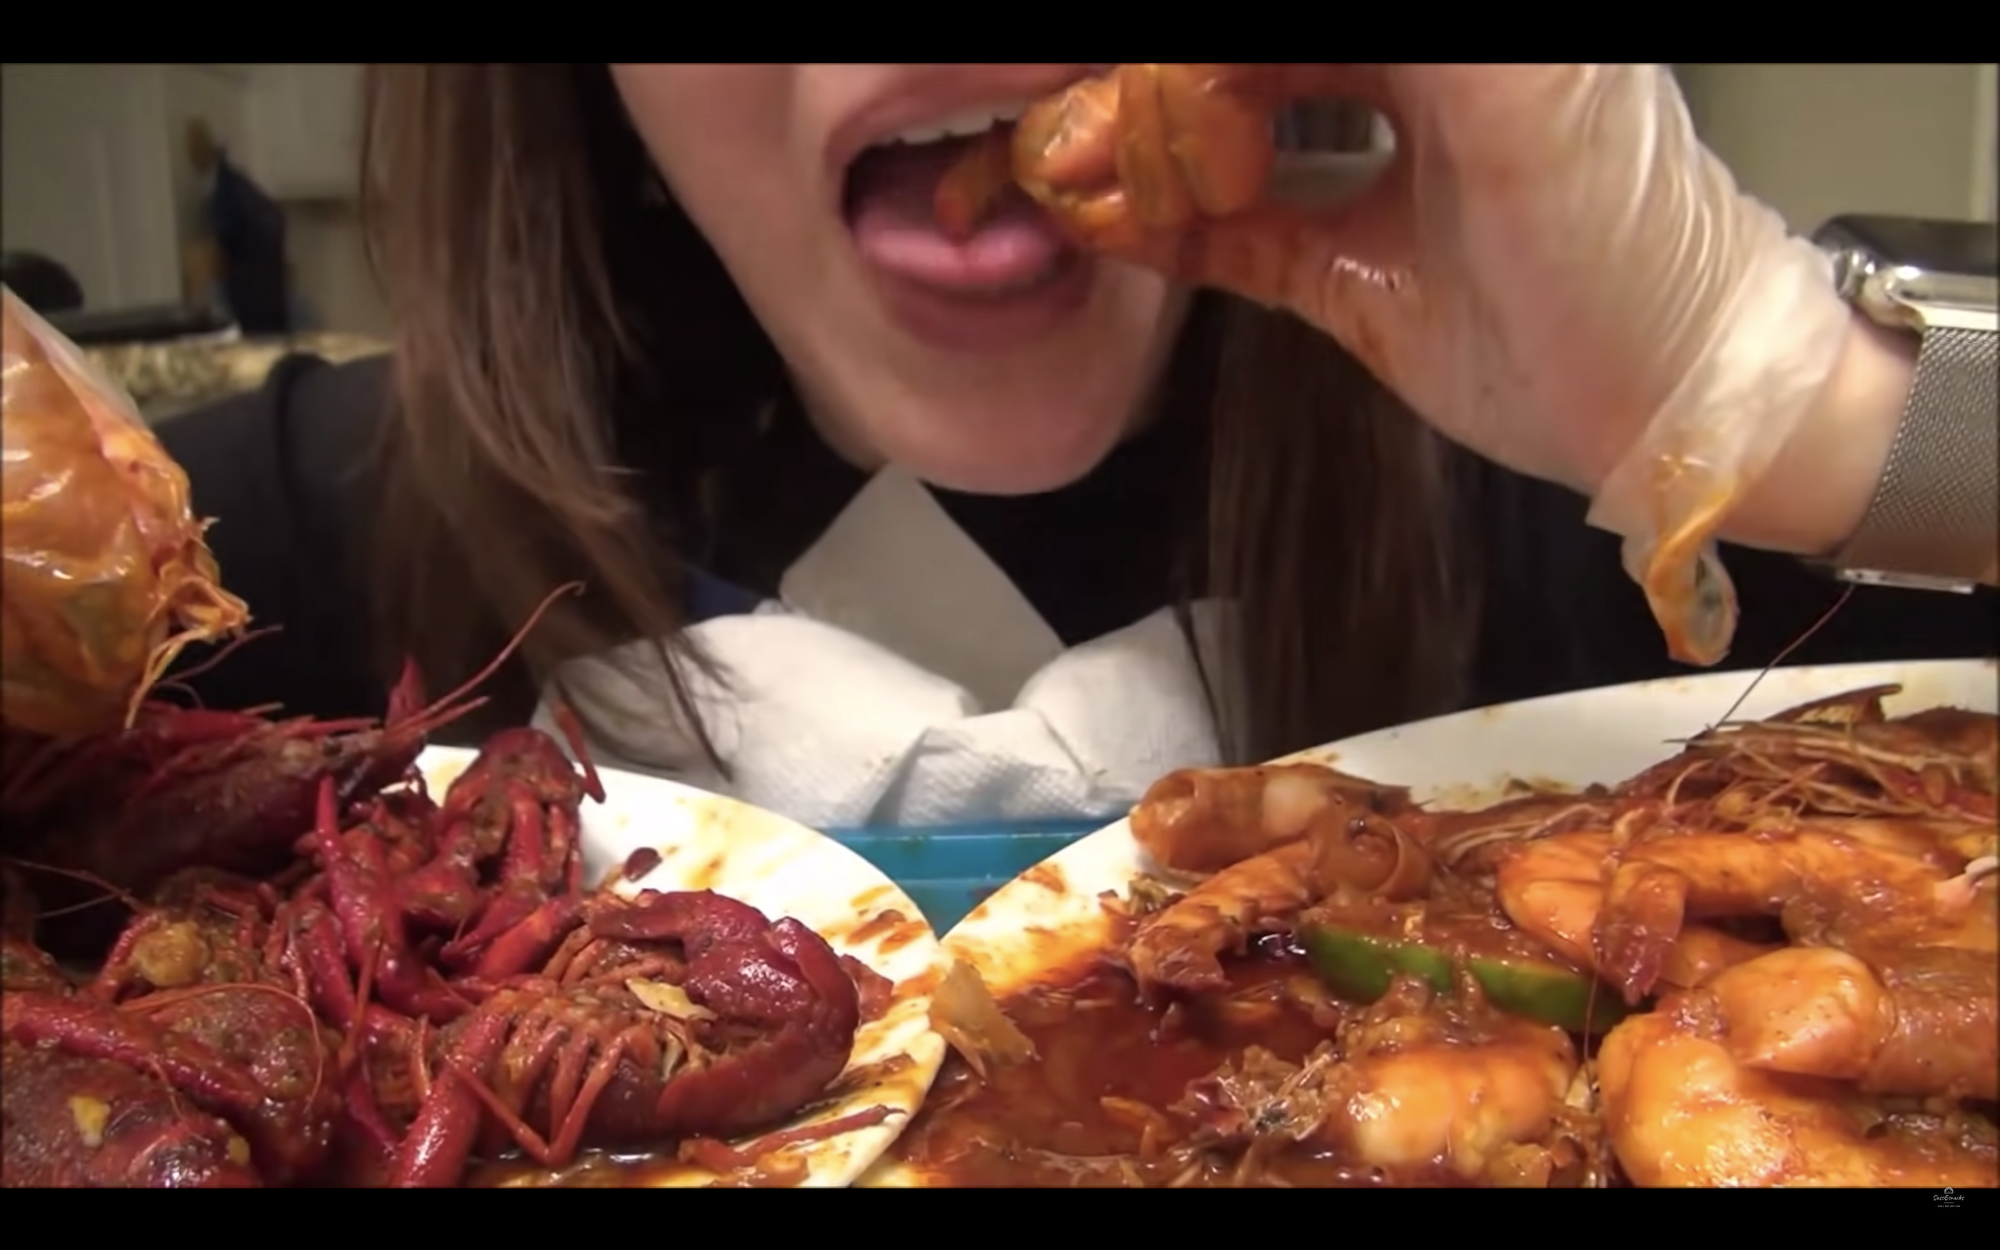 A person wearing latex gloves is placing a crawfish in their mouth and are about to bite down as there lay two plates of red and saucy